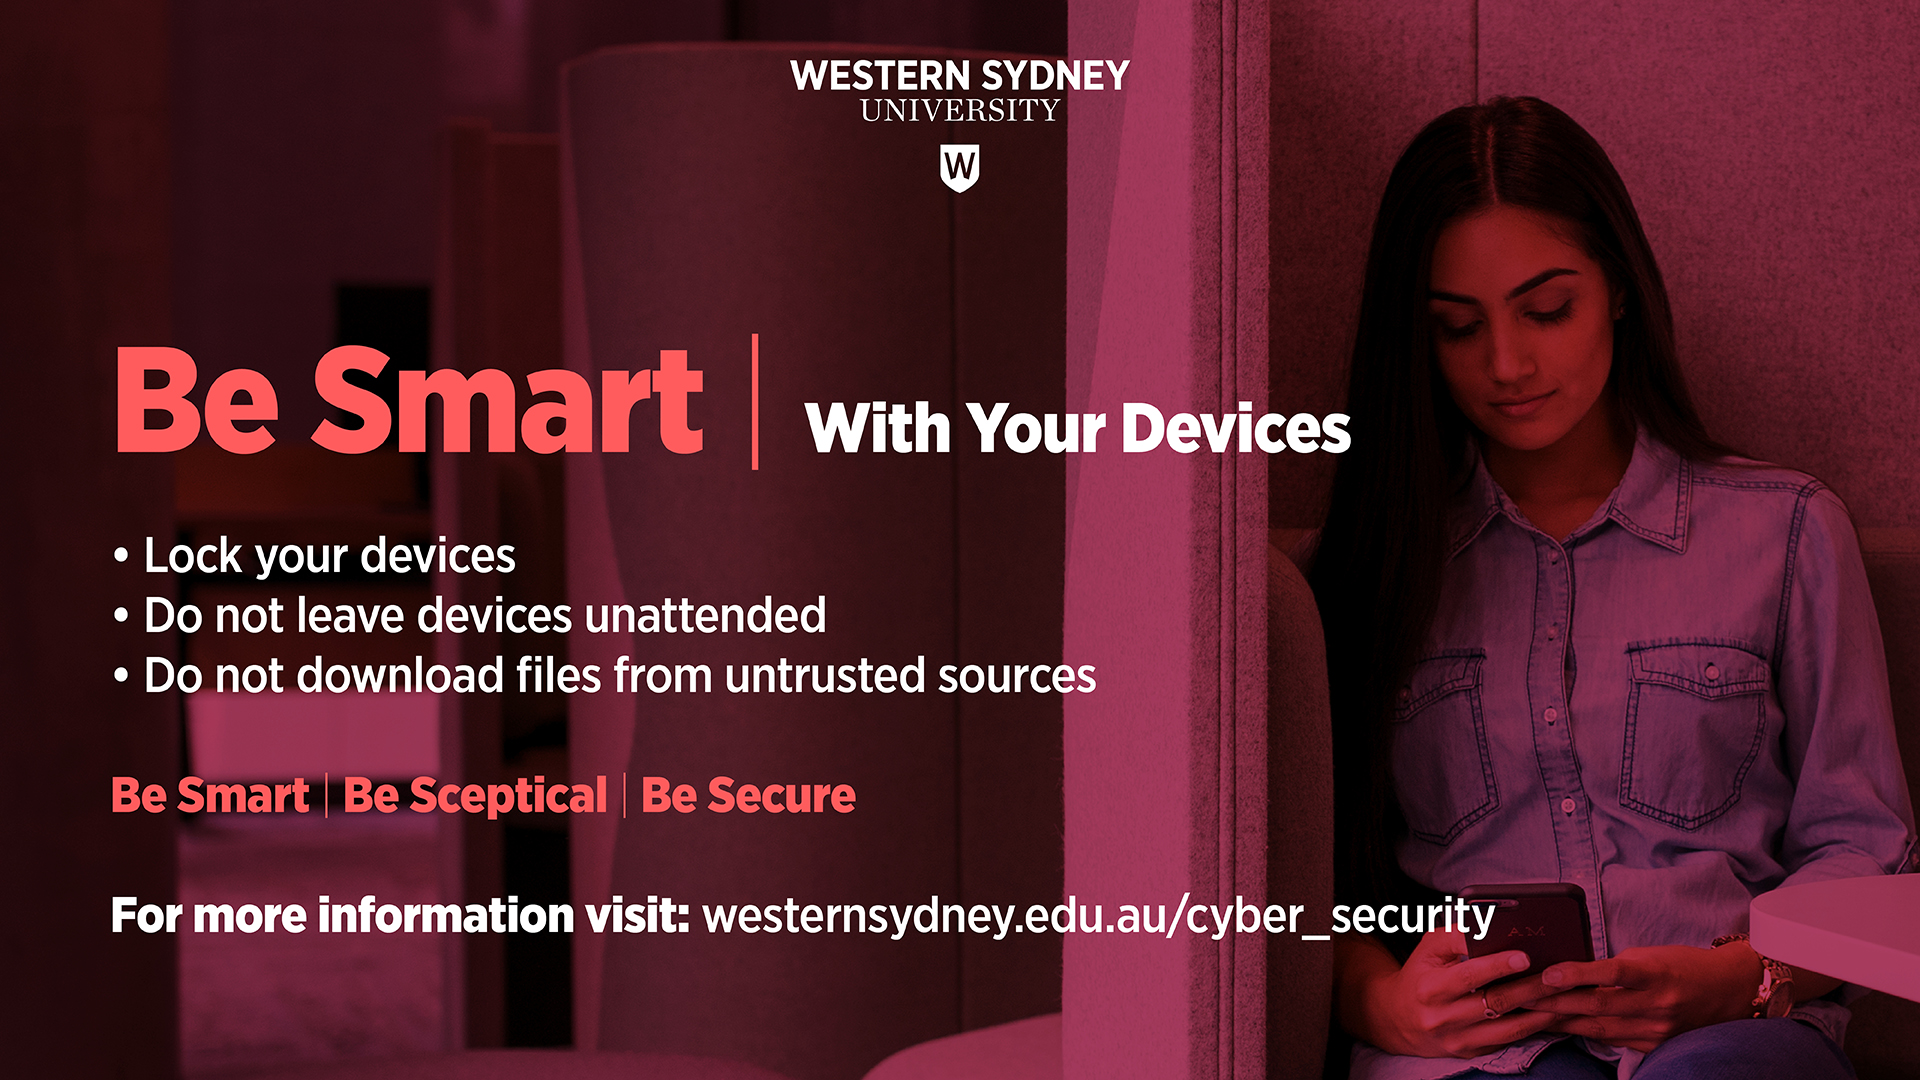 Be Smart with your devices: lock your devices; do not leave devices unattended; do not download files from untrusted sources.